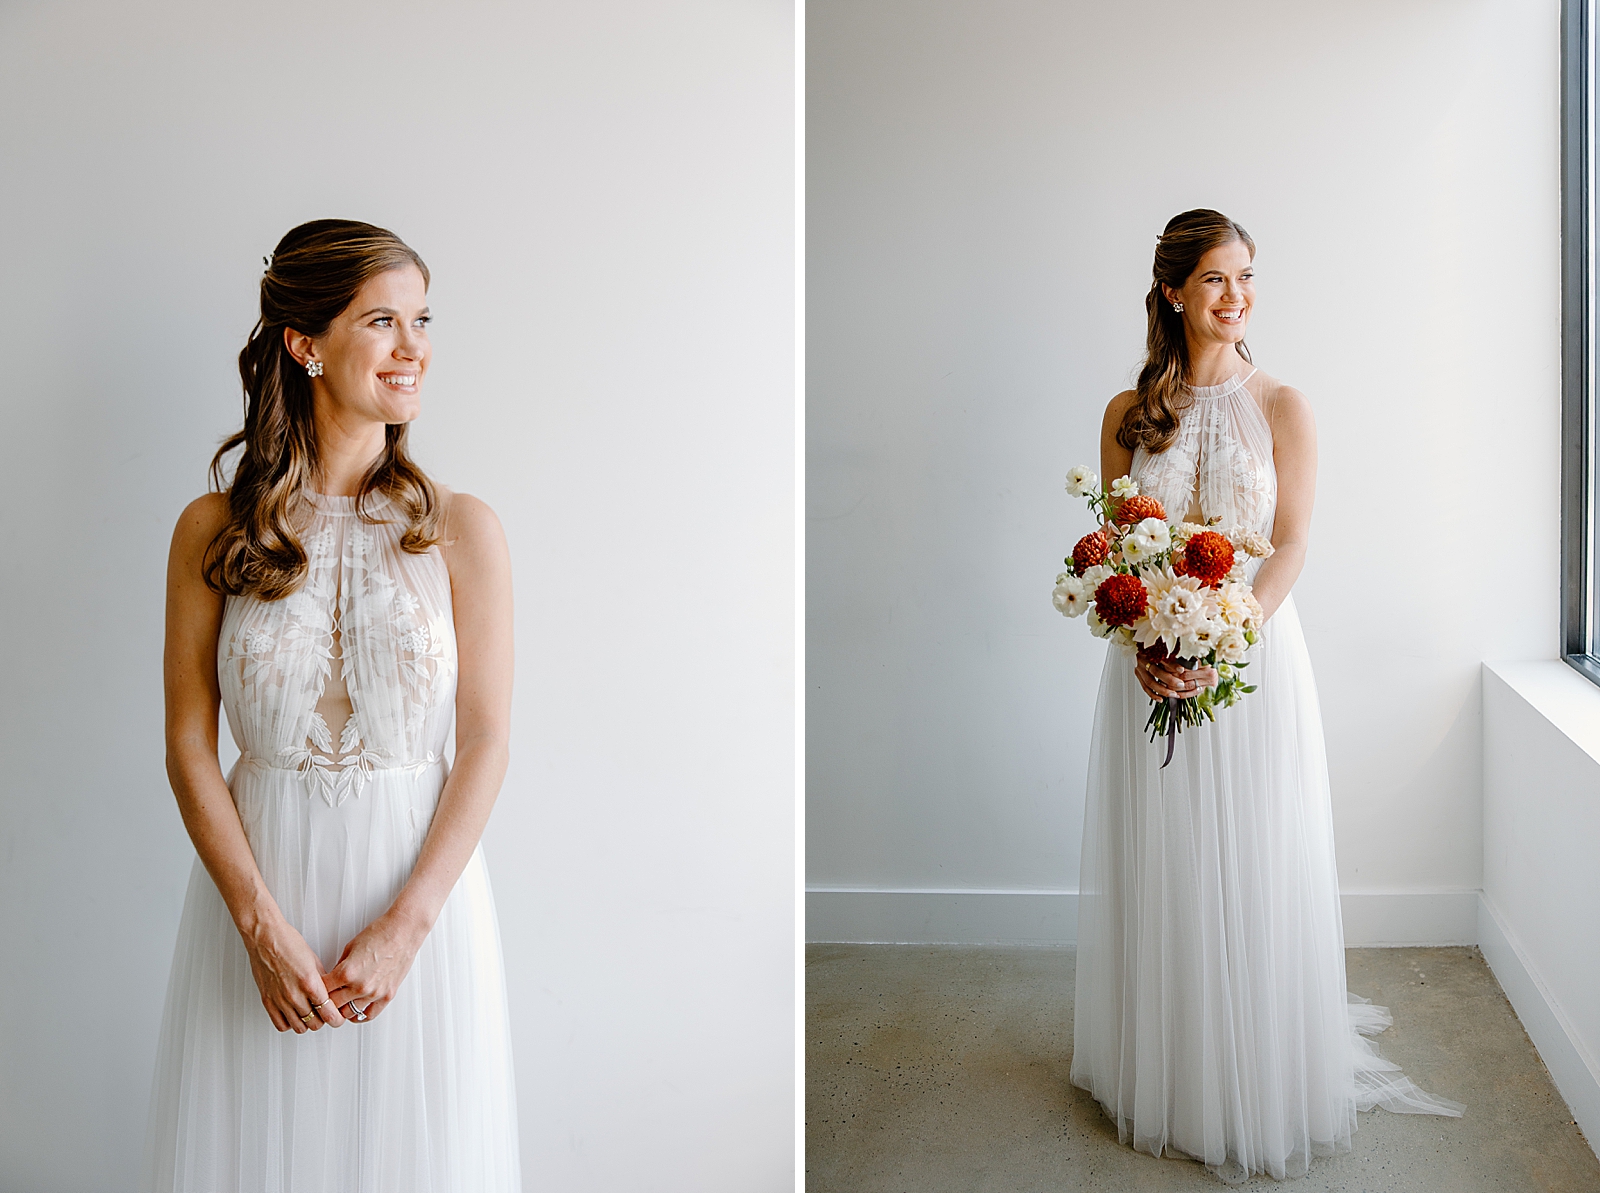 Portrait of Bride with and without bouquet